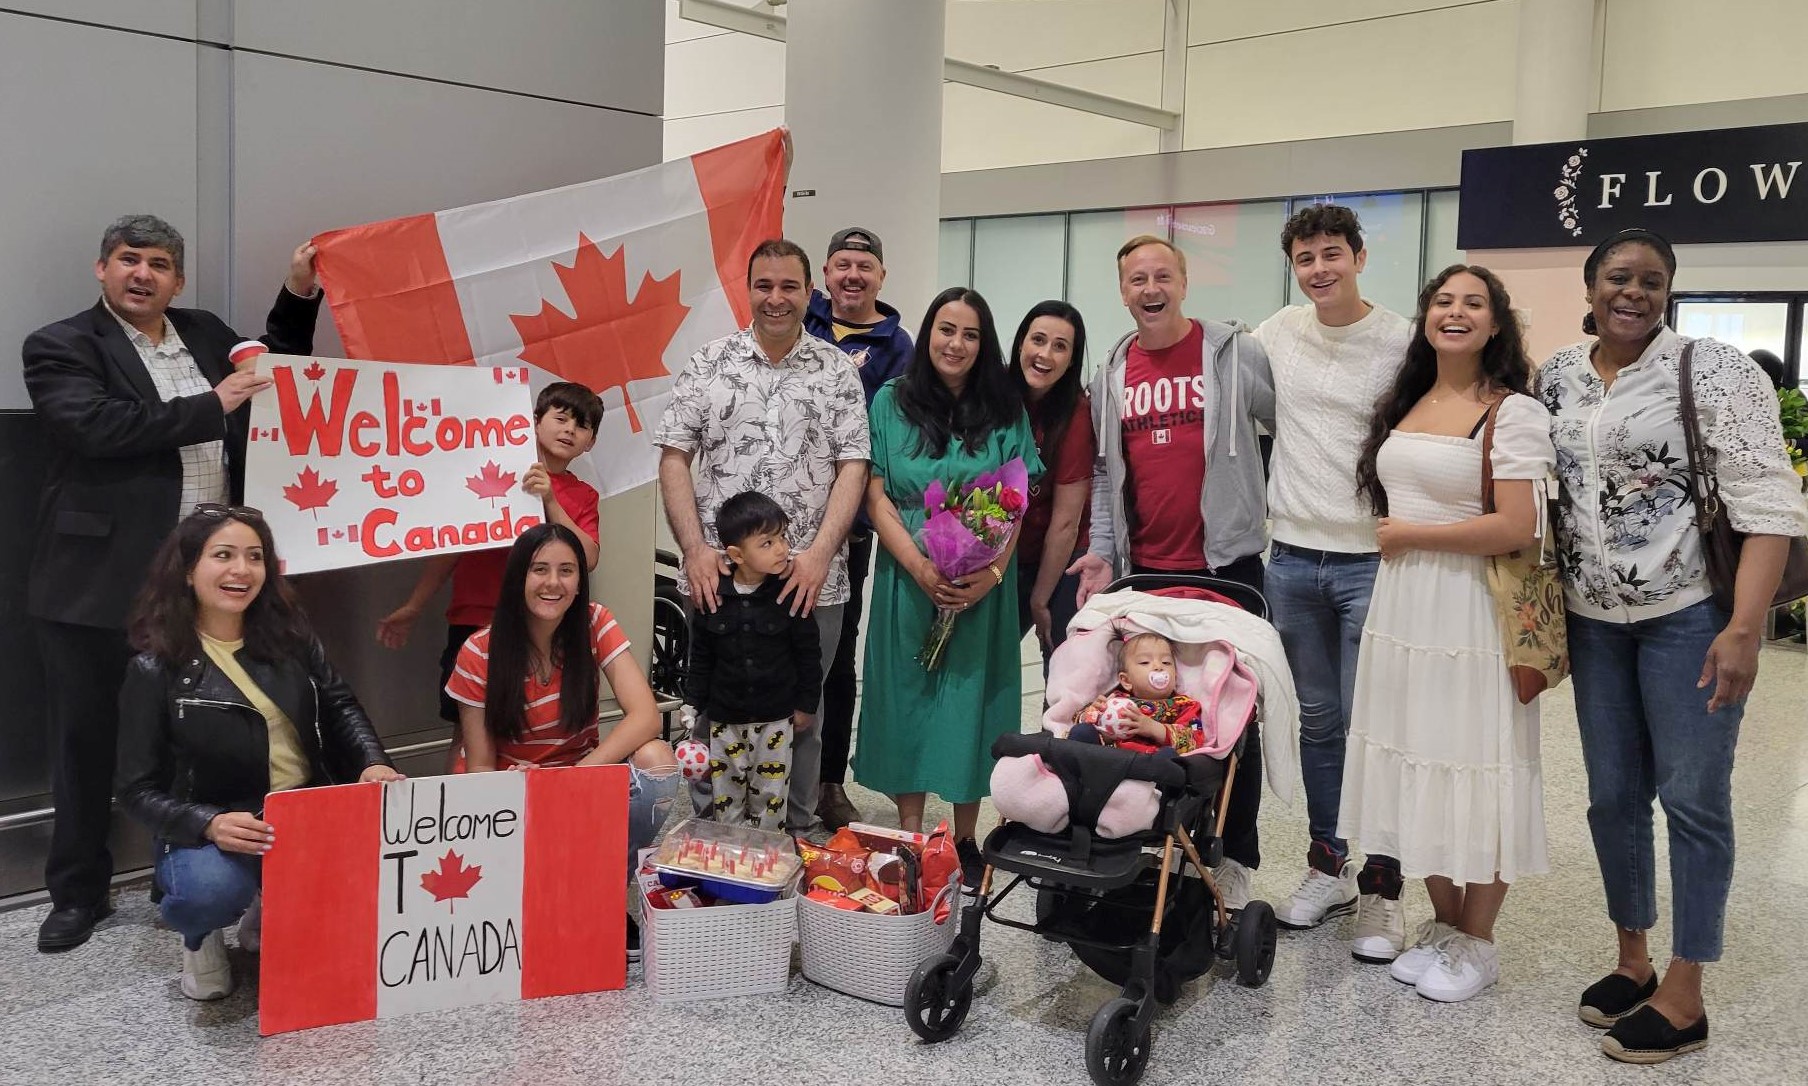 Shawn, Obed, and other supporters welcoming a just-arrived refugee family with Canadian flags, flowers, and food baskets, at the airport.